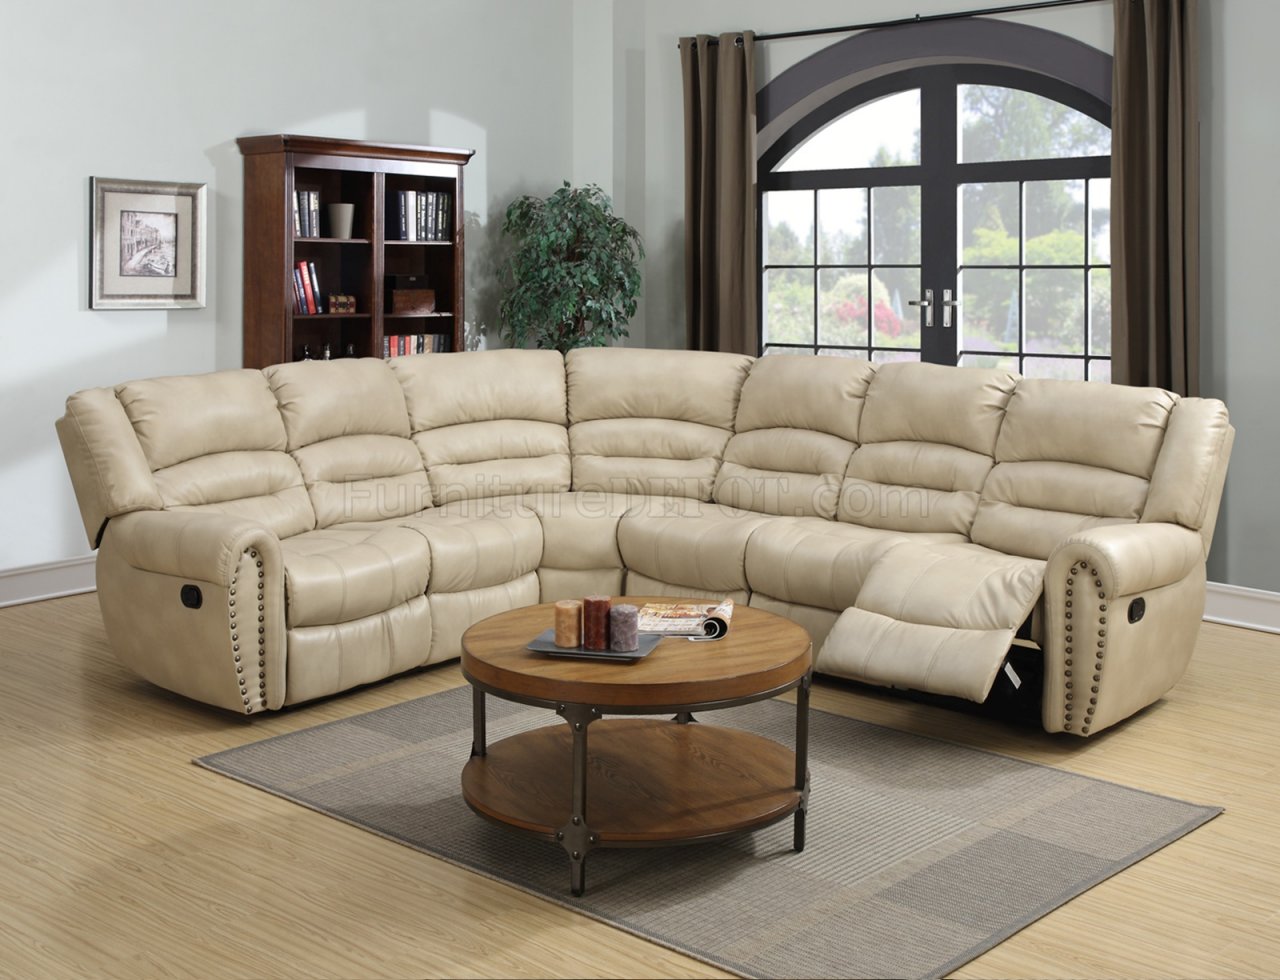 beige colored leather sectional sofa